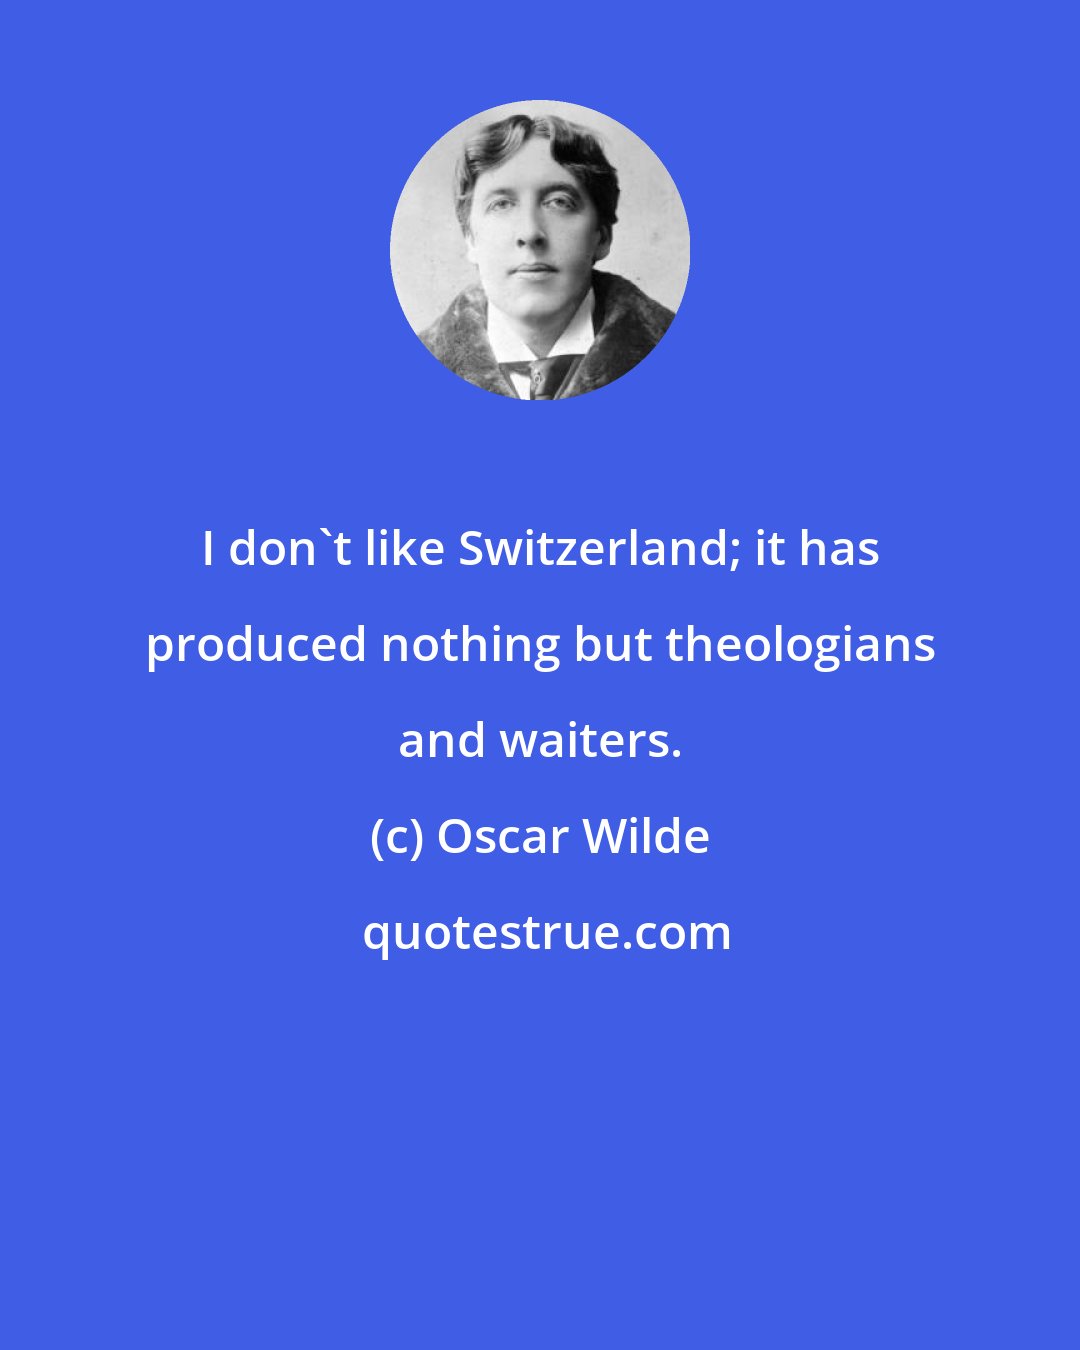 Oscar Wilde: I don't like Switzerland; it has produced nothing but theologians and waiters.